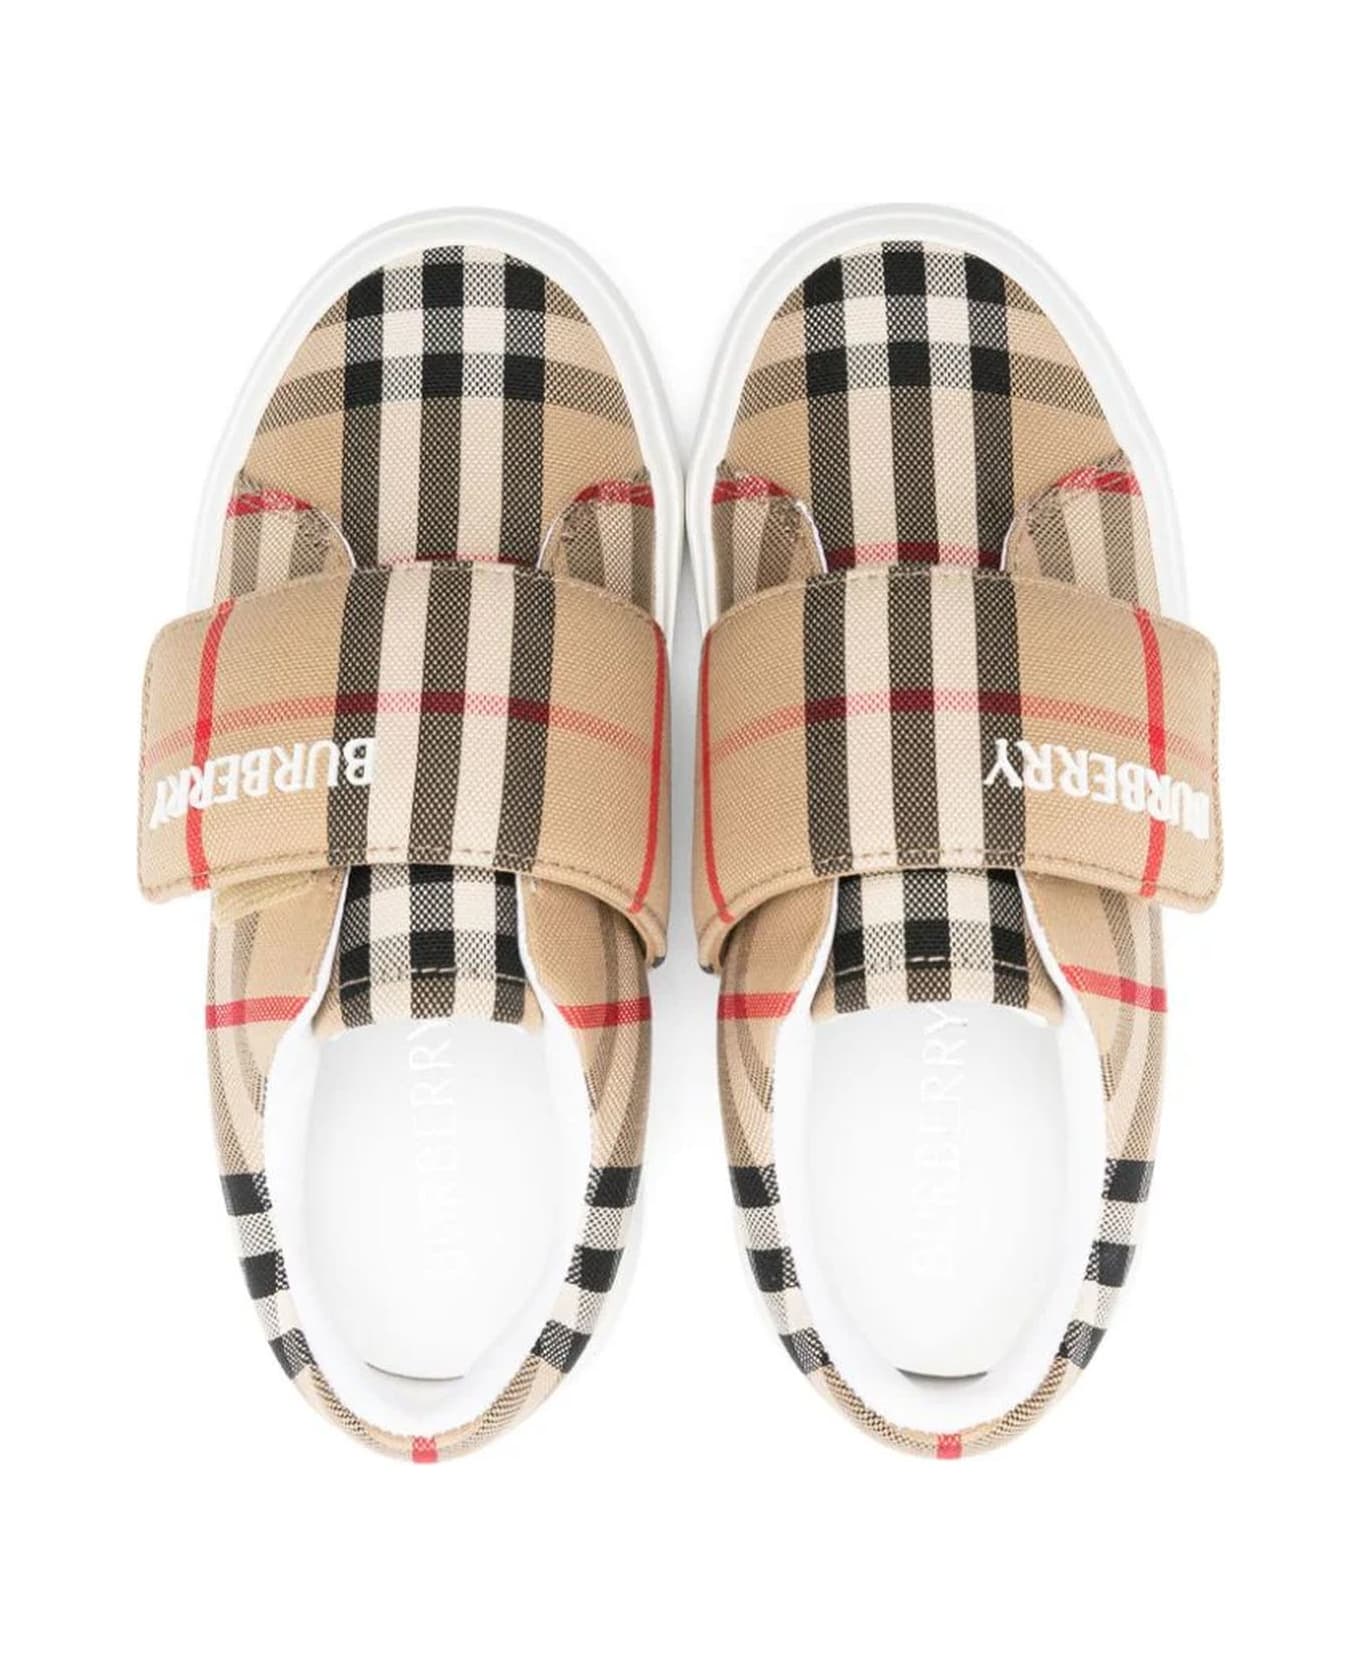 Burberry Beige Touch-strap Trainers - Archive Beige Ip Chk